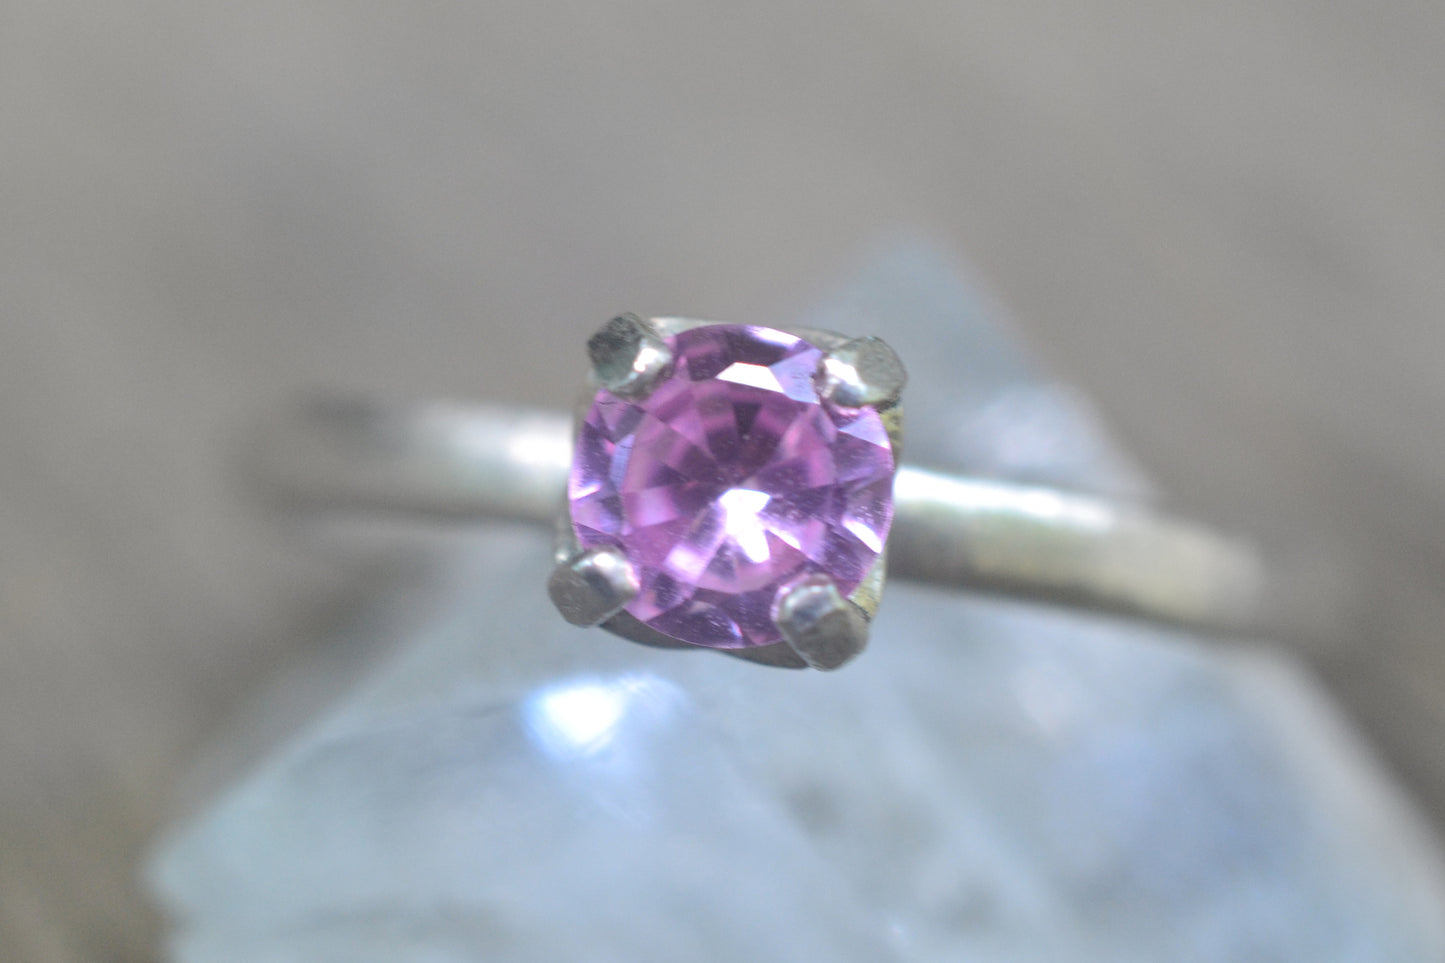 5mm Pink Sapphire Solitaire Ring in 925 Silver